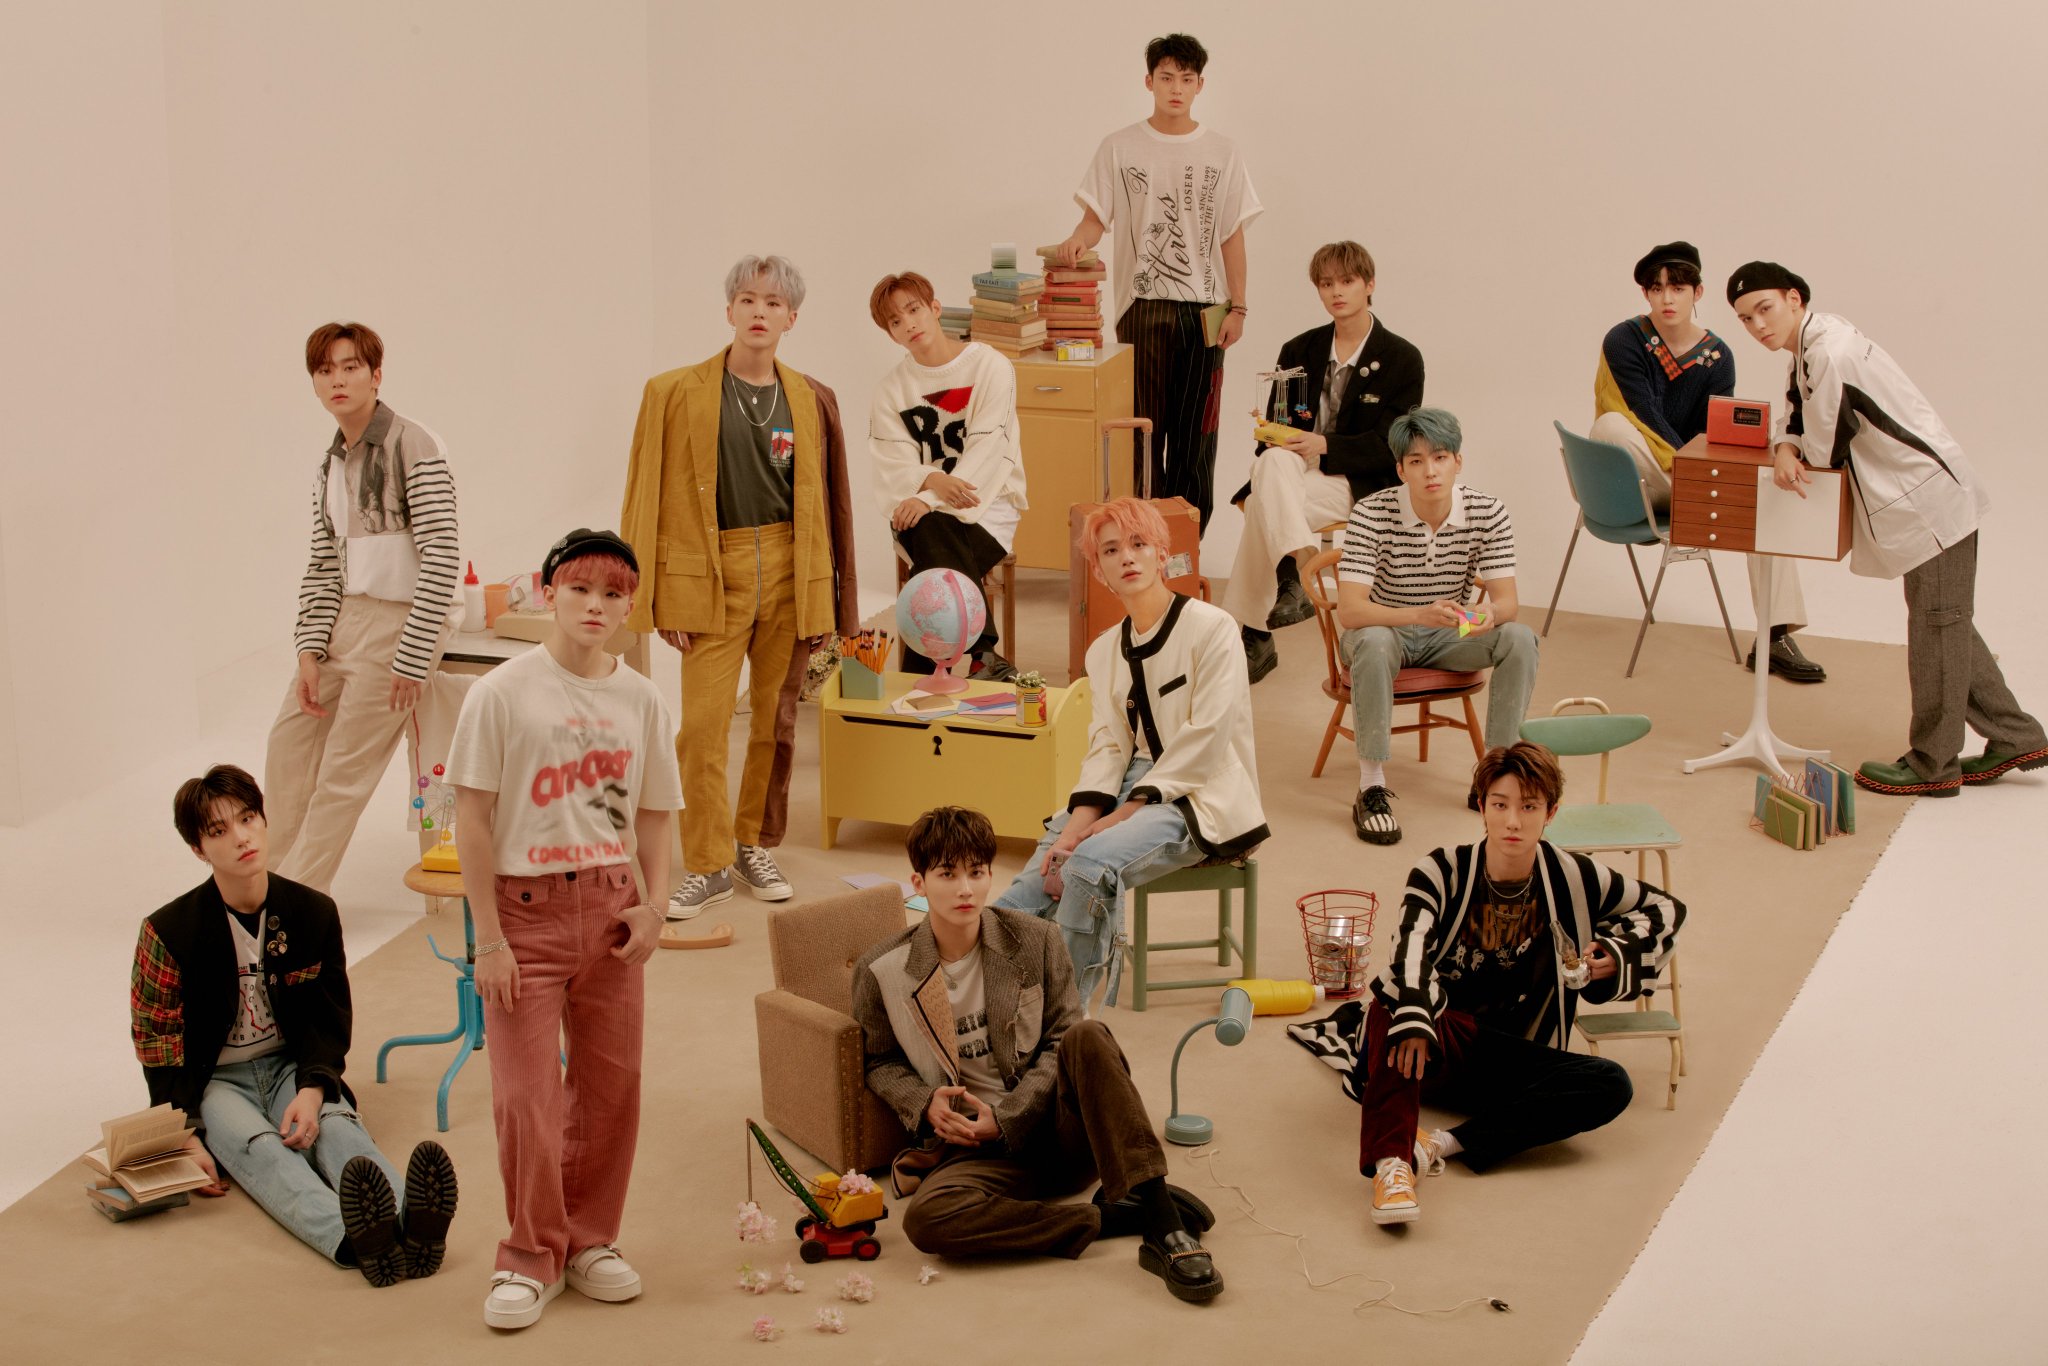 seventeen-to-perform-korean-ver-of-fallin-flower-for-the-first-time-at-2020-the-fact-music-awards